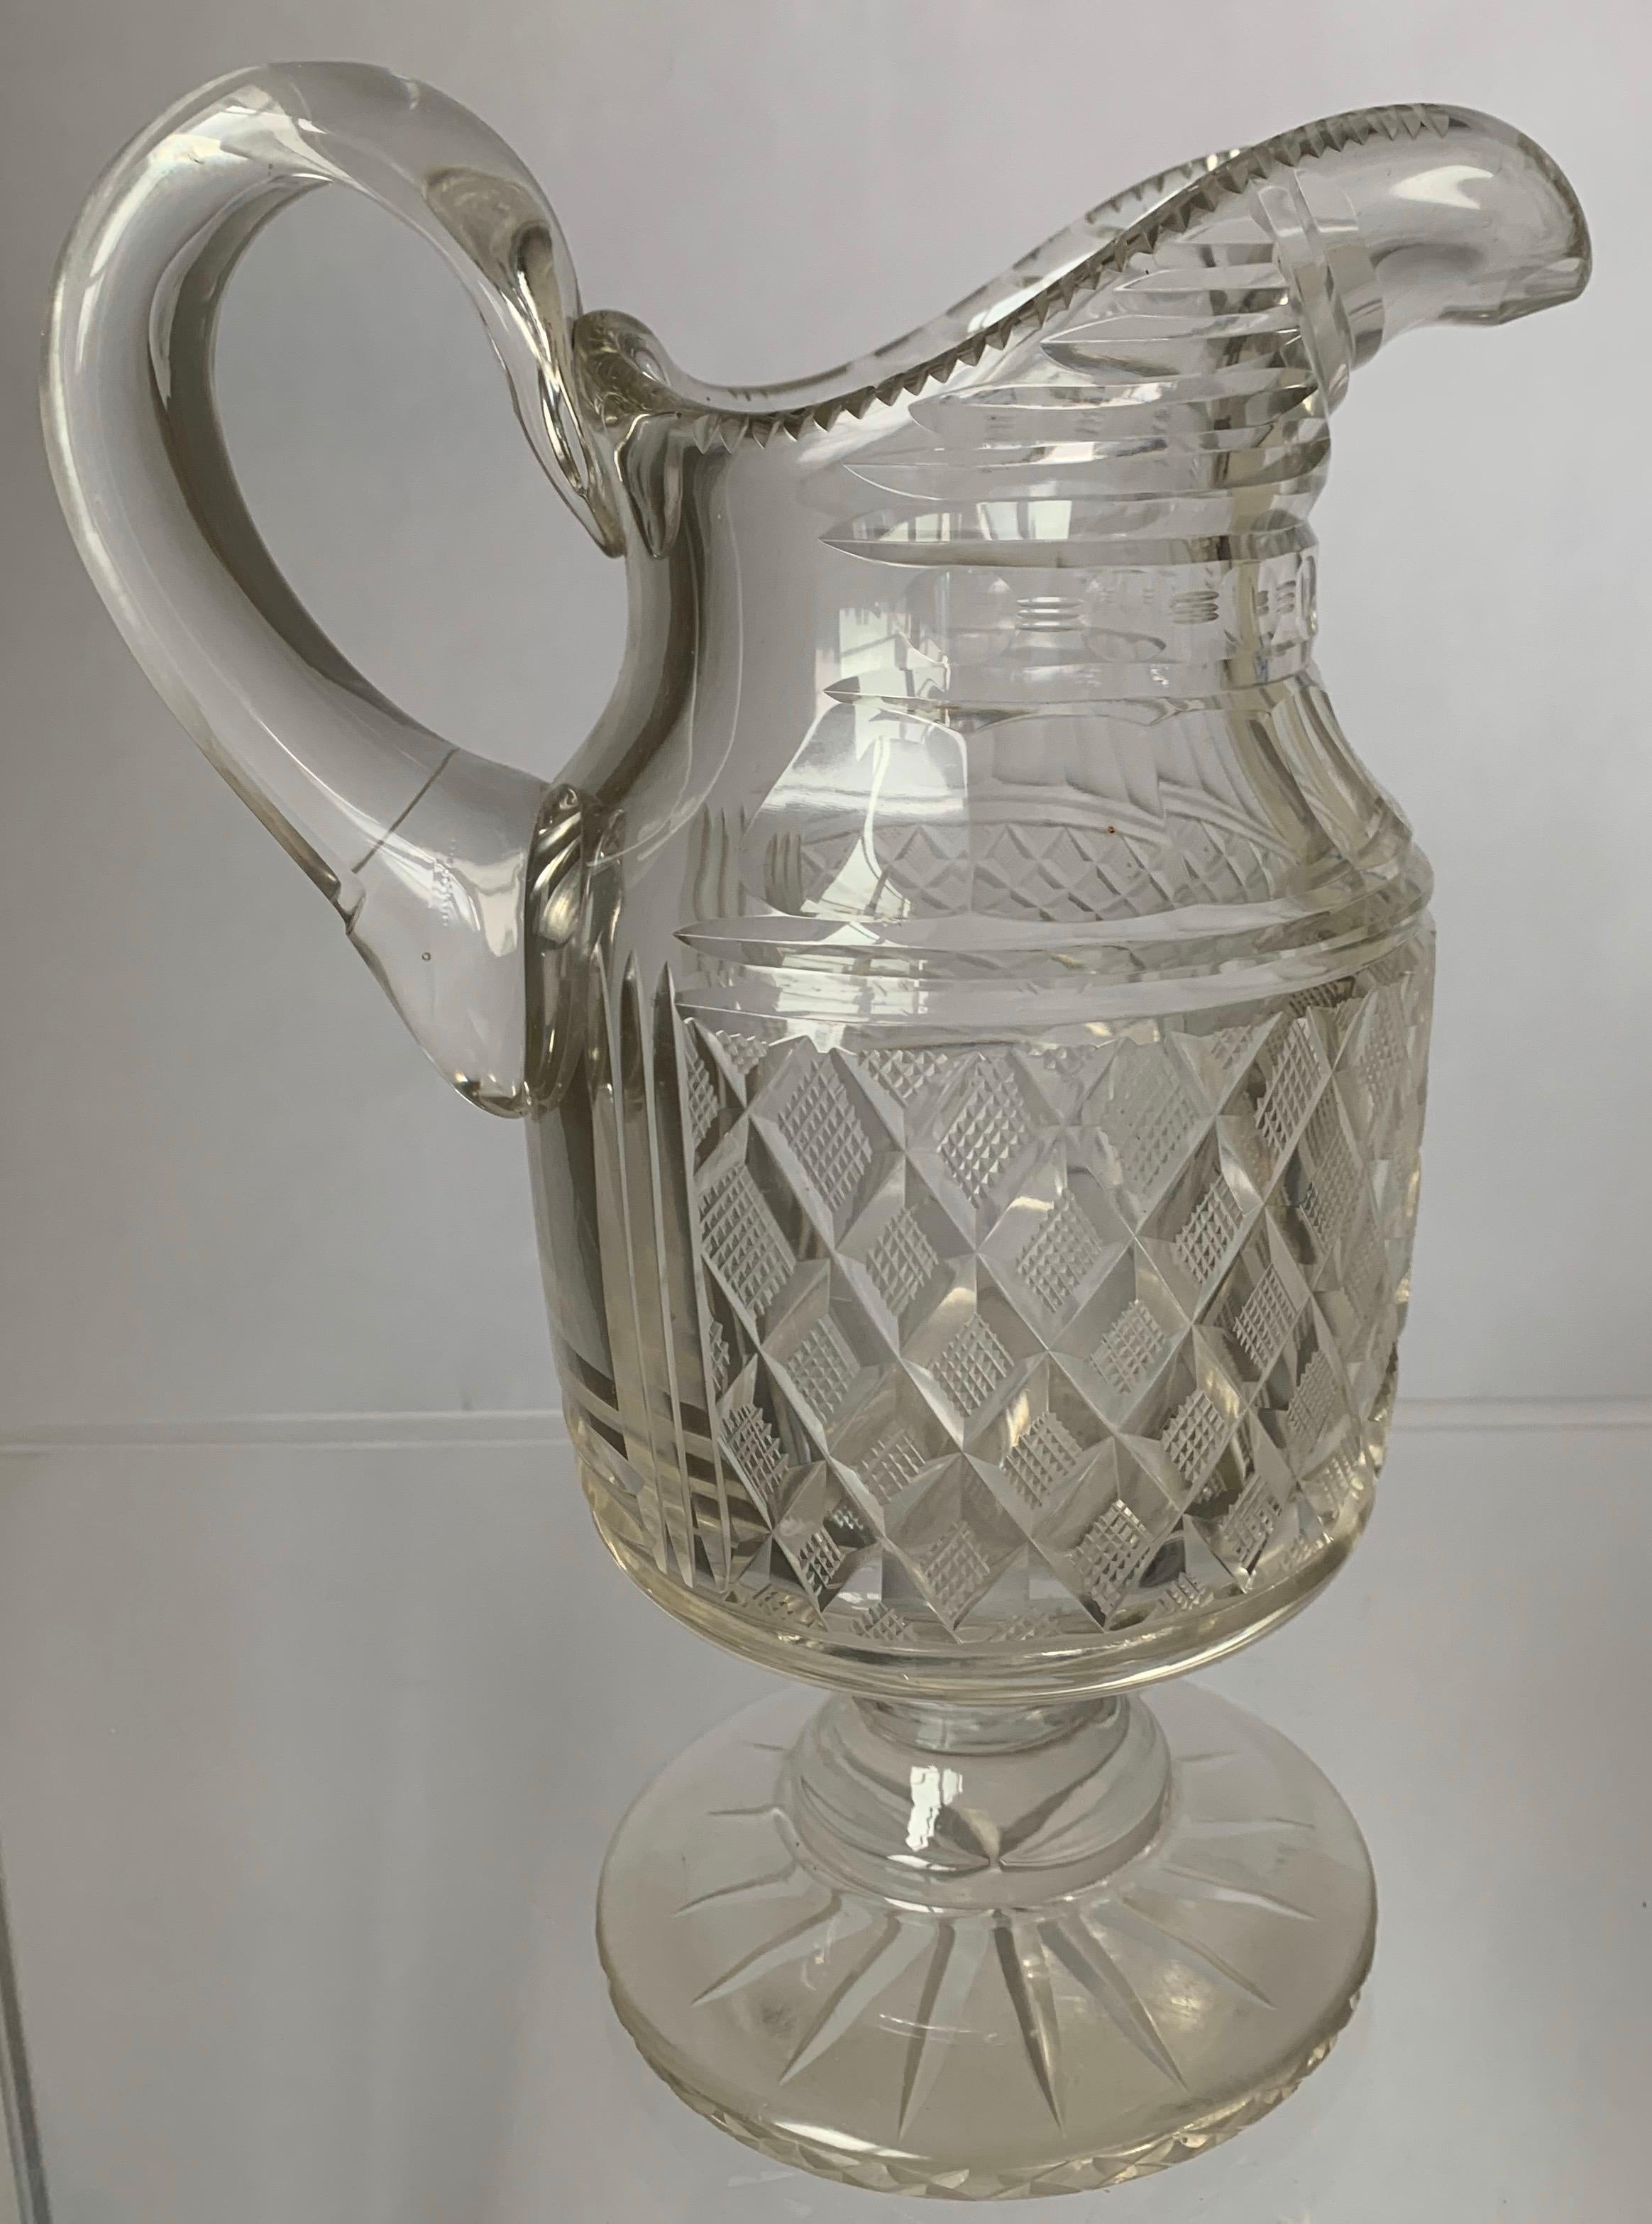 Anglo-Irish footed jug, circa 1820. Cut crystal with overall diamond cutting in excellent condition.